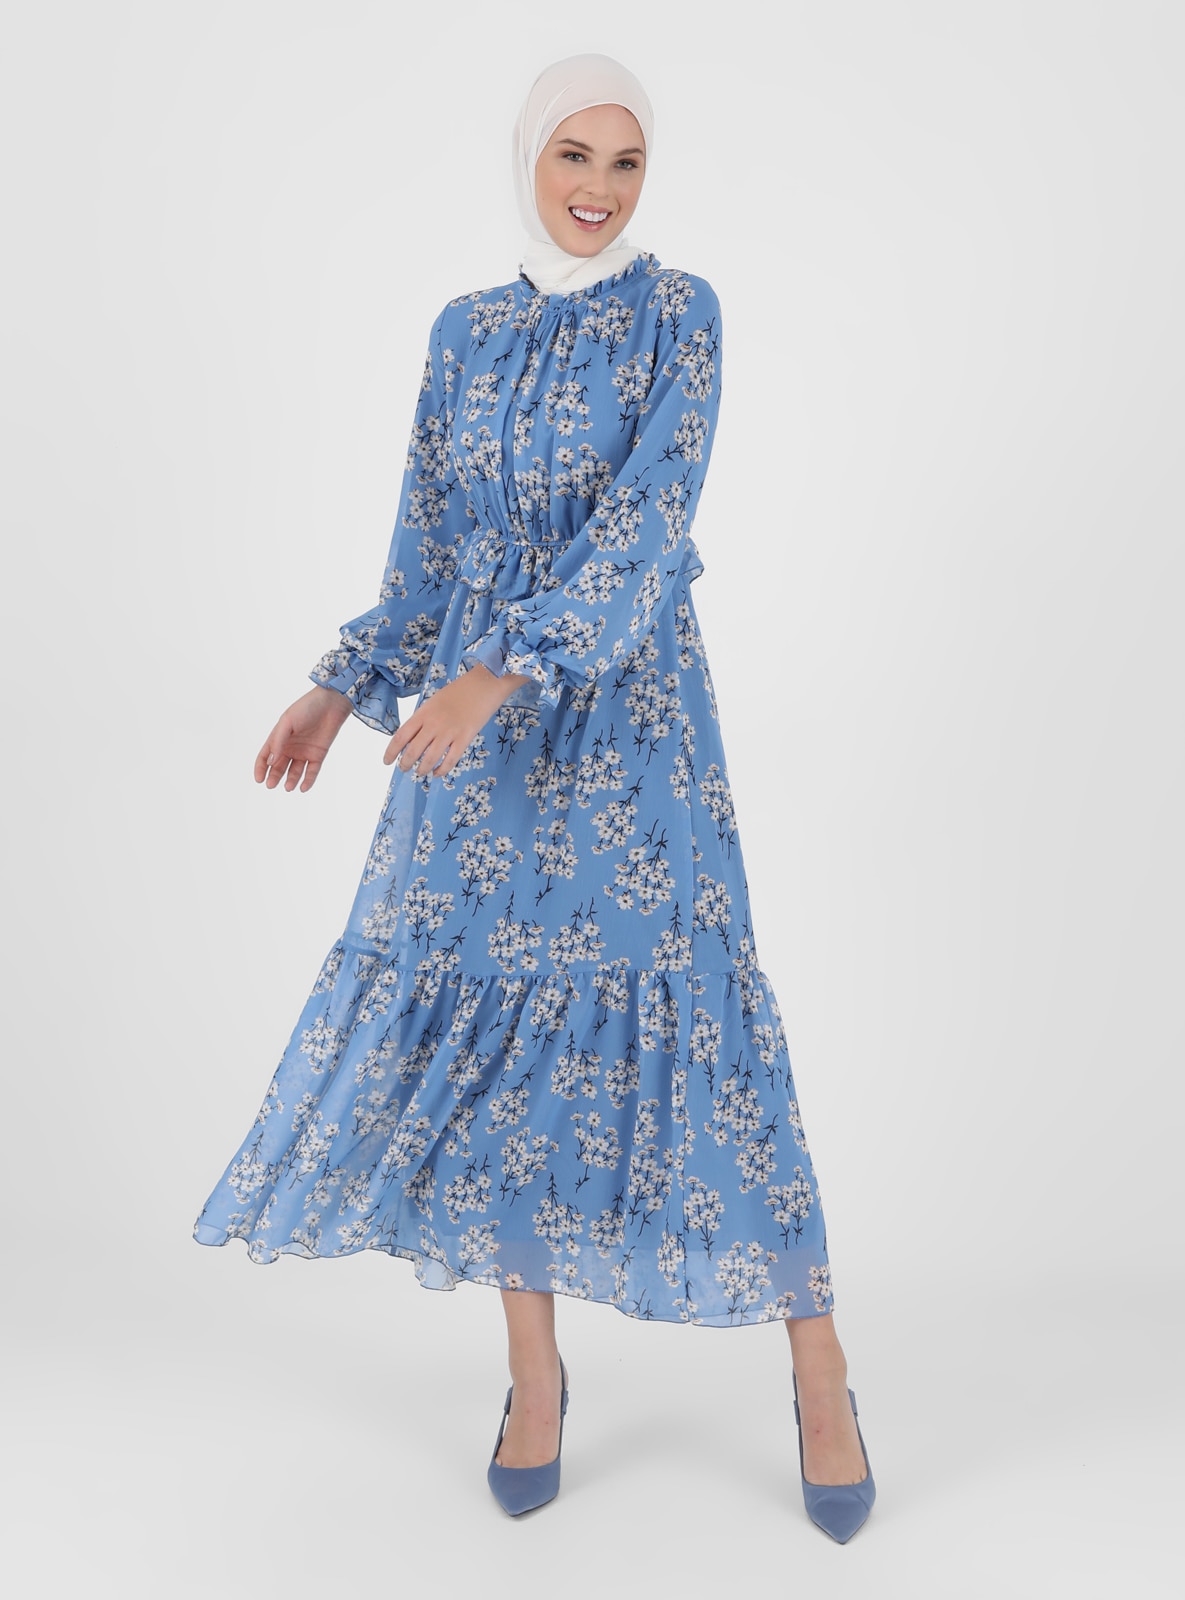 White - Blue - Floral - Crew neck - Fully Lined - Modest Dress